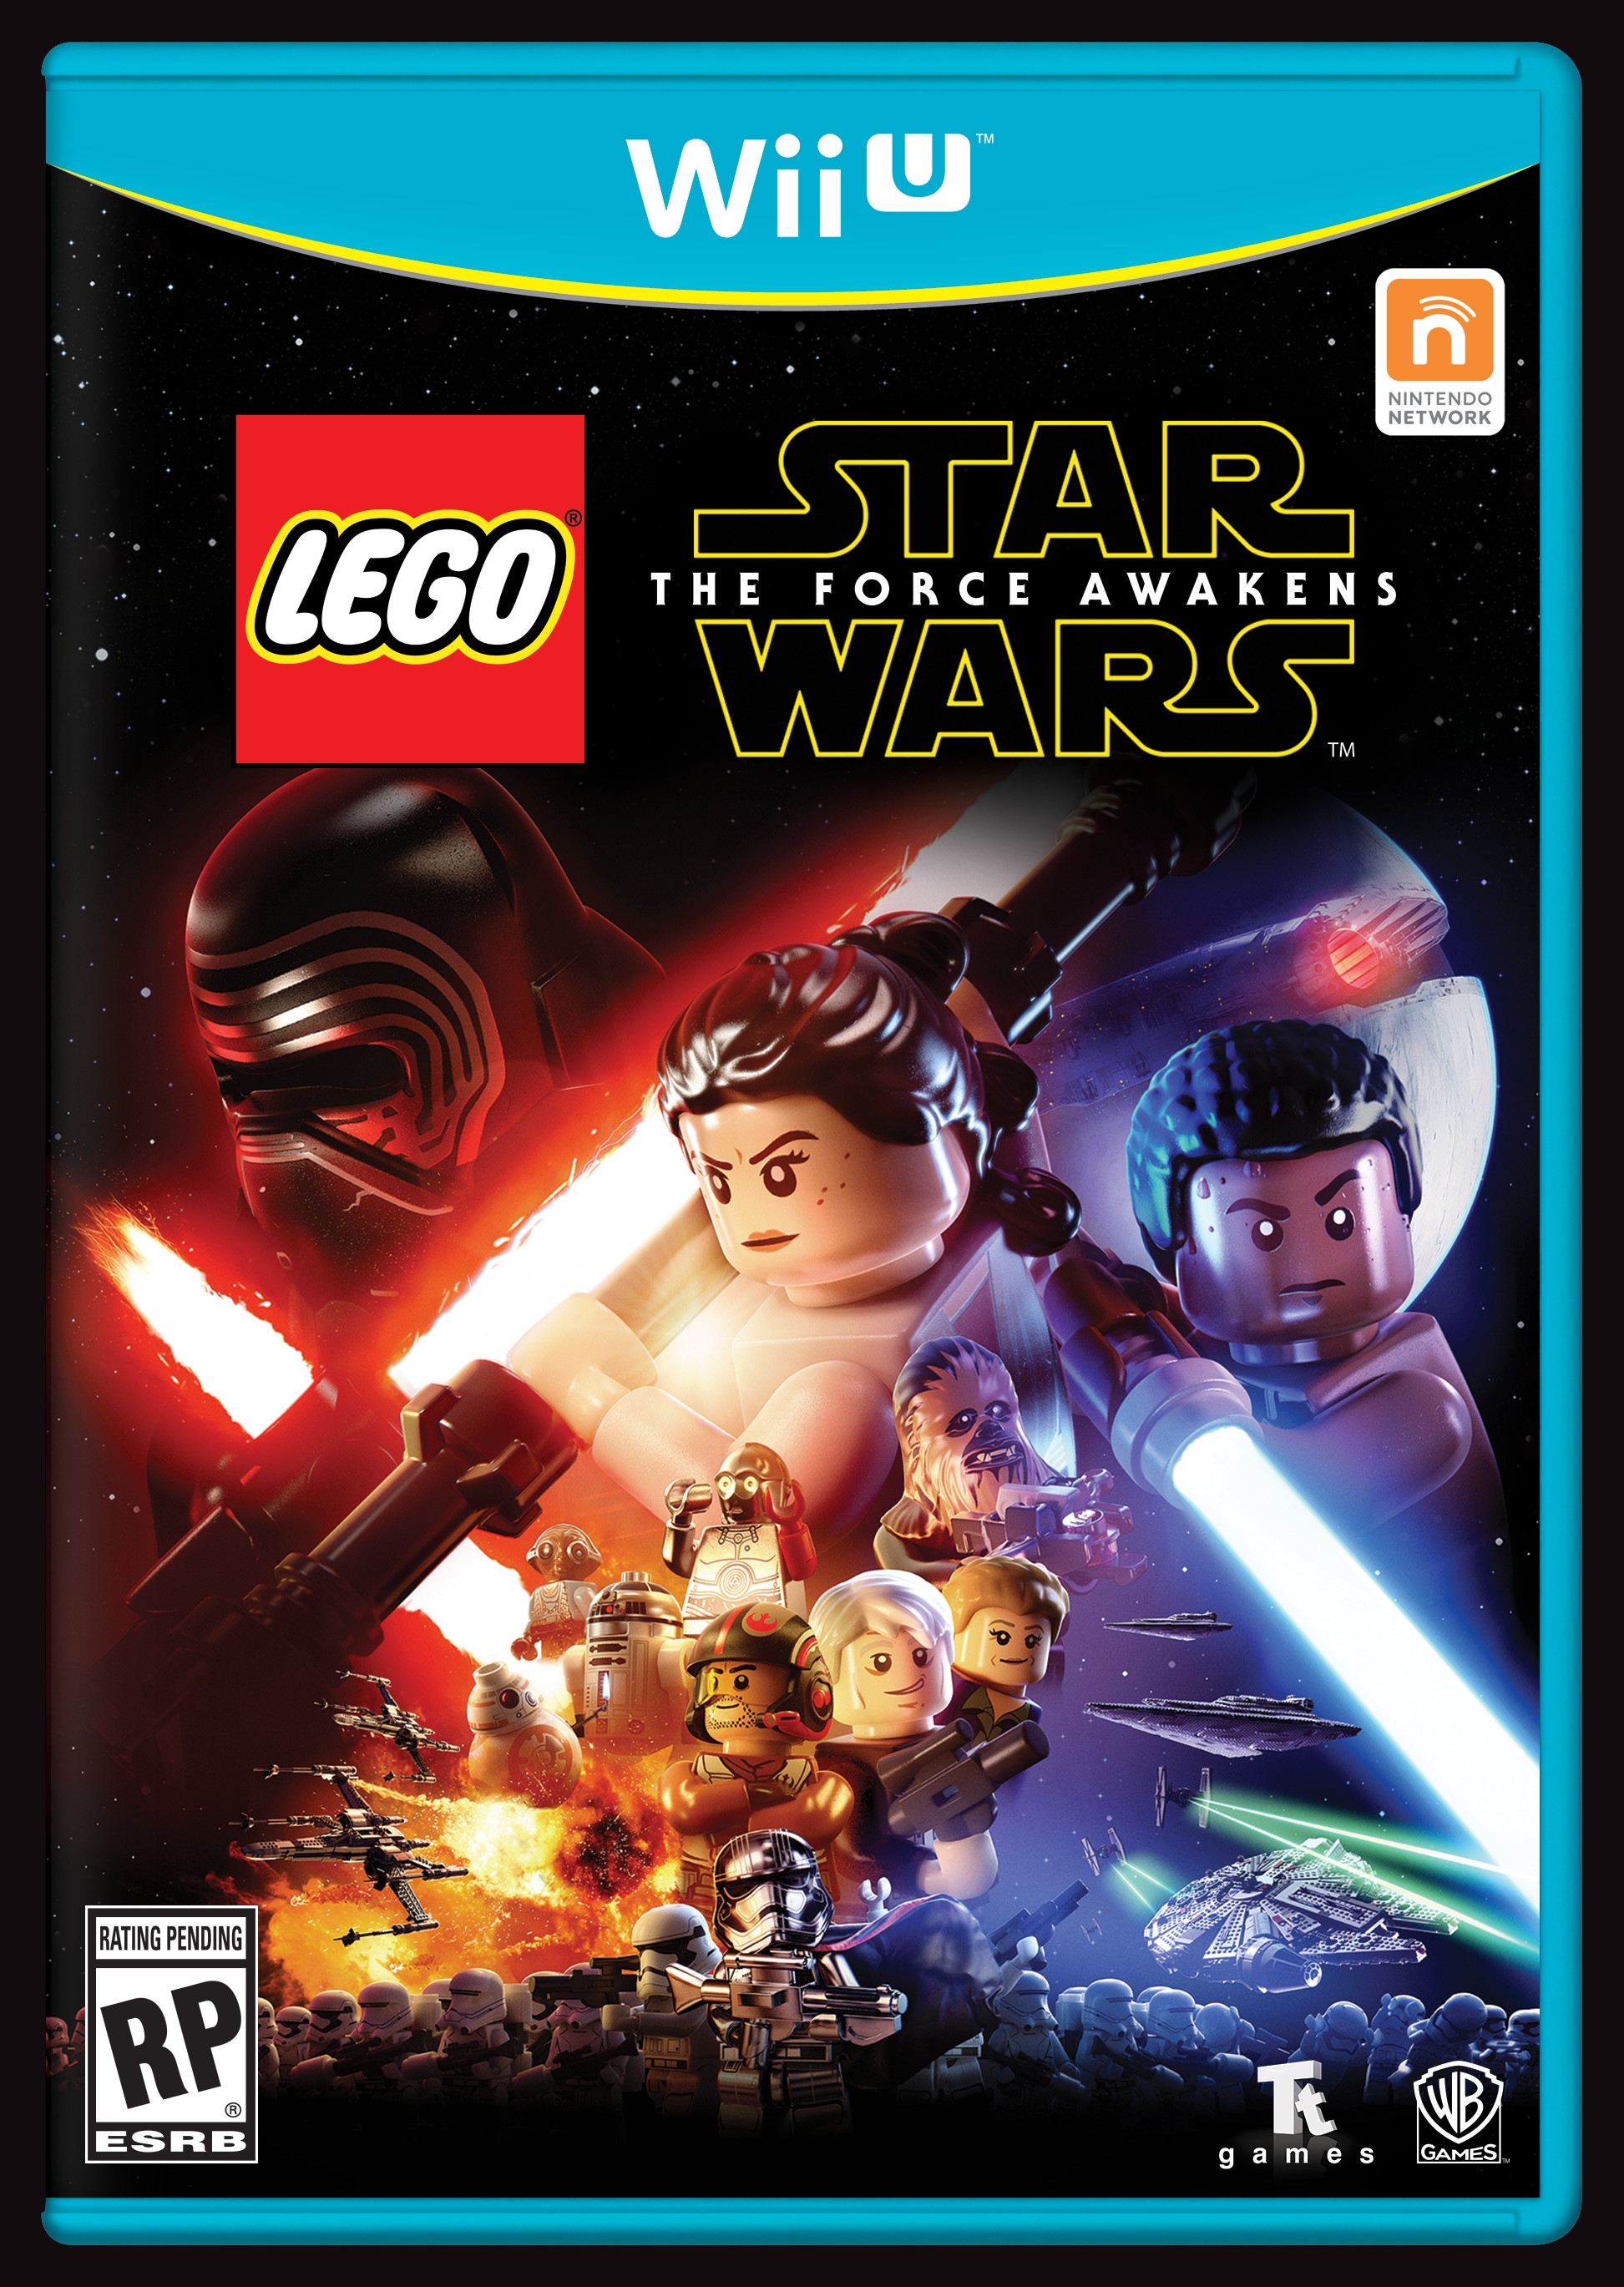 all lego wii games